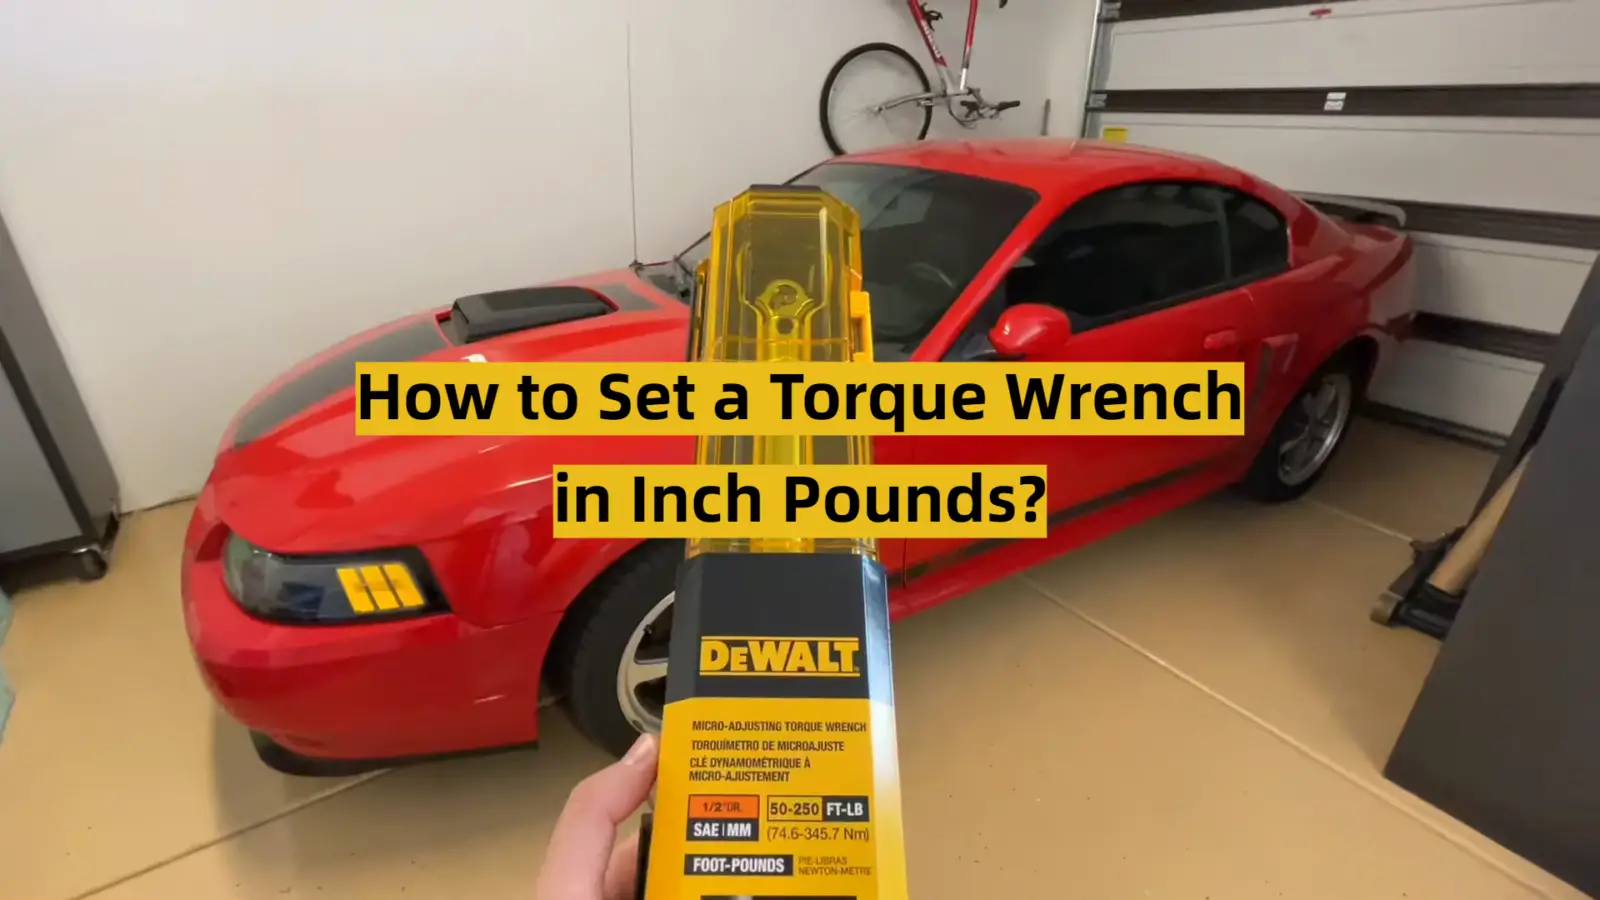 How to Set a Torque Wrench in Inch Pounds?